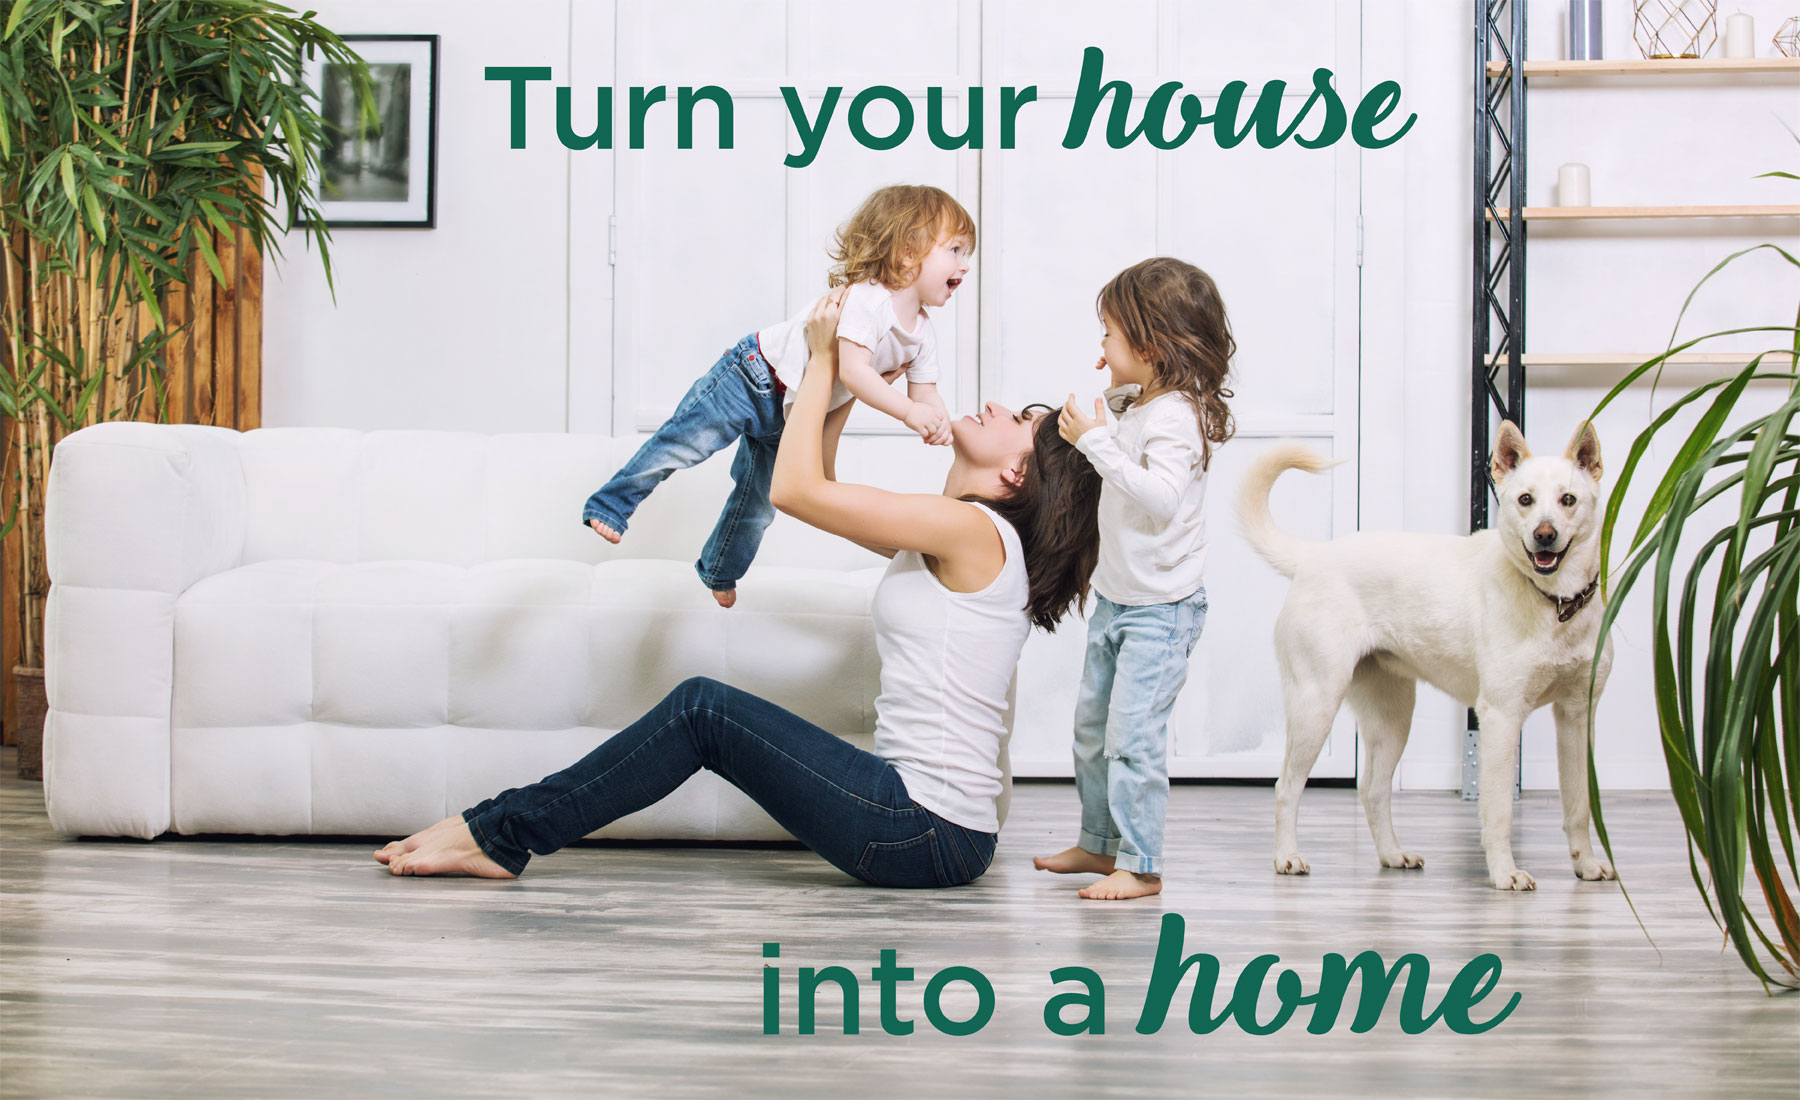 Turn your house into a home